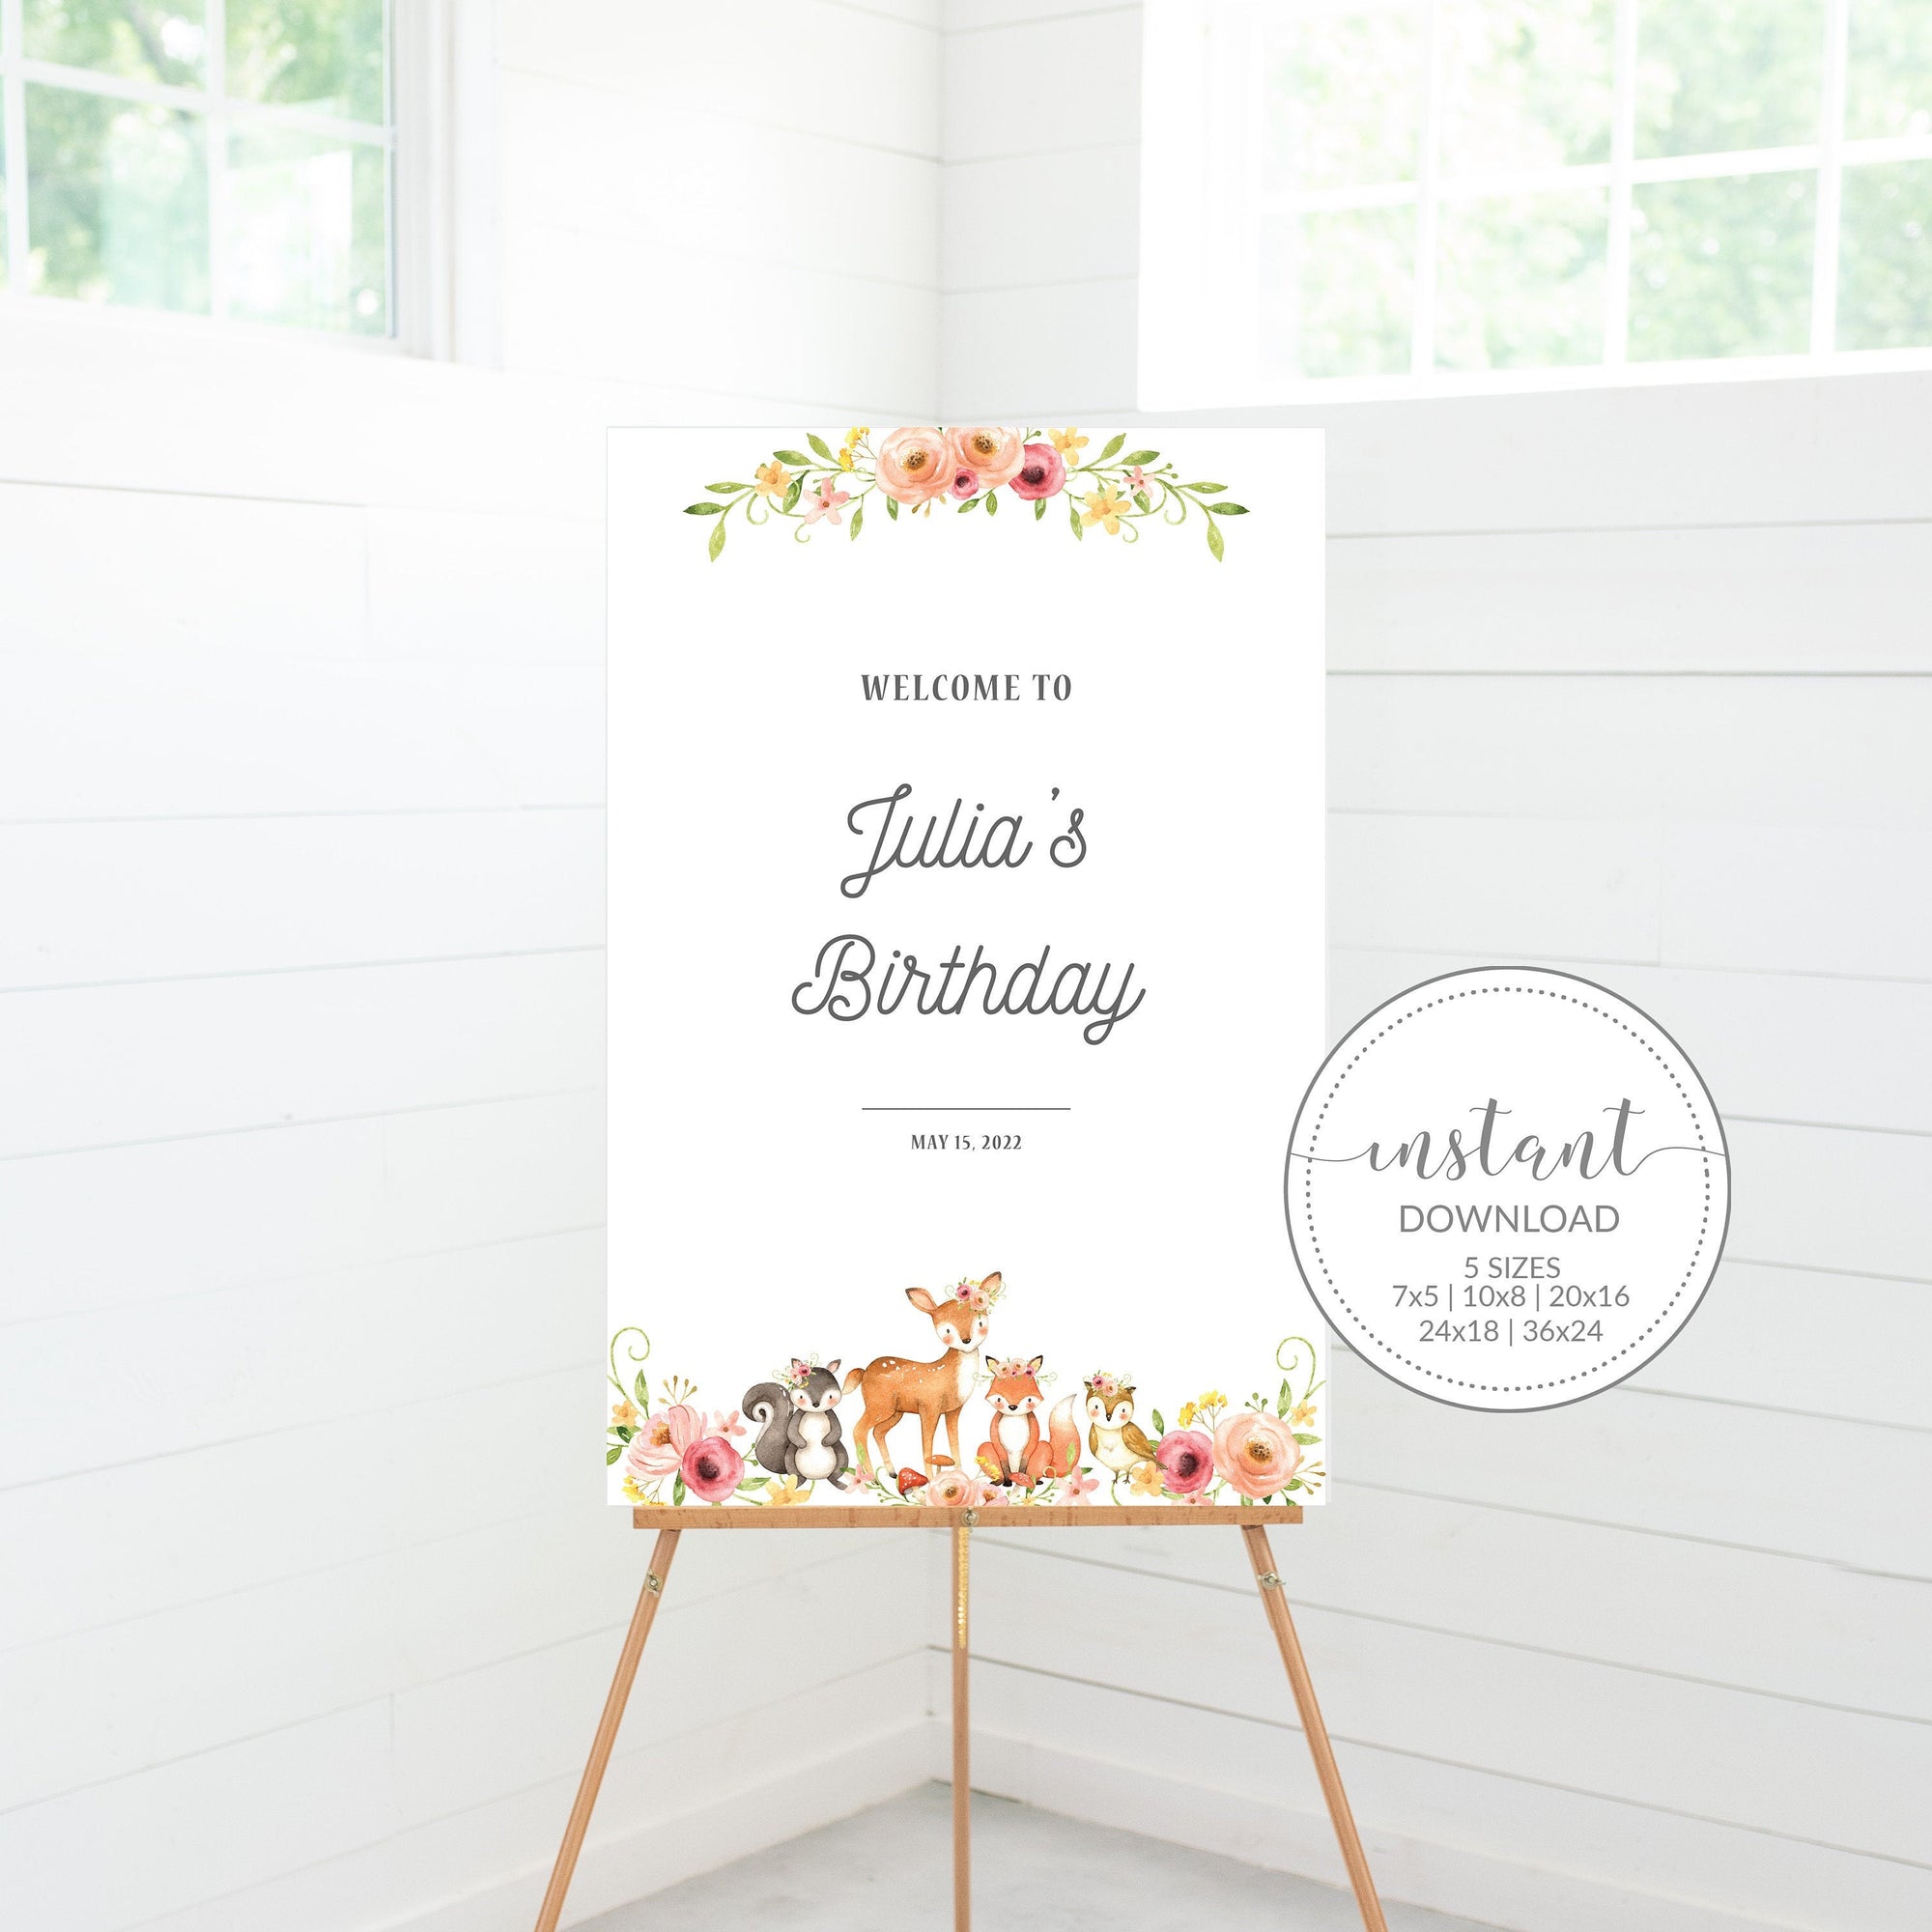 The Happy Planner Bambi Stationery & Party Supplies